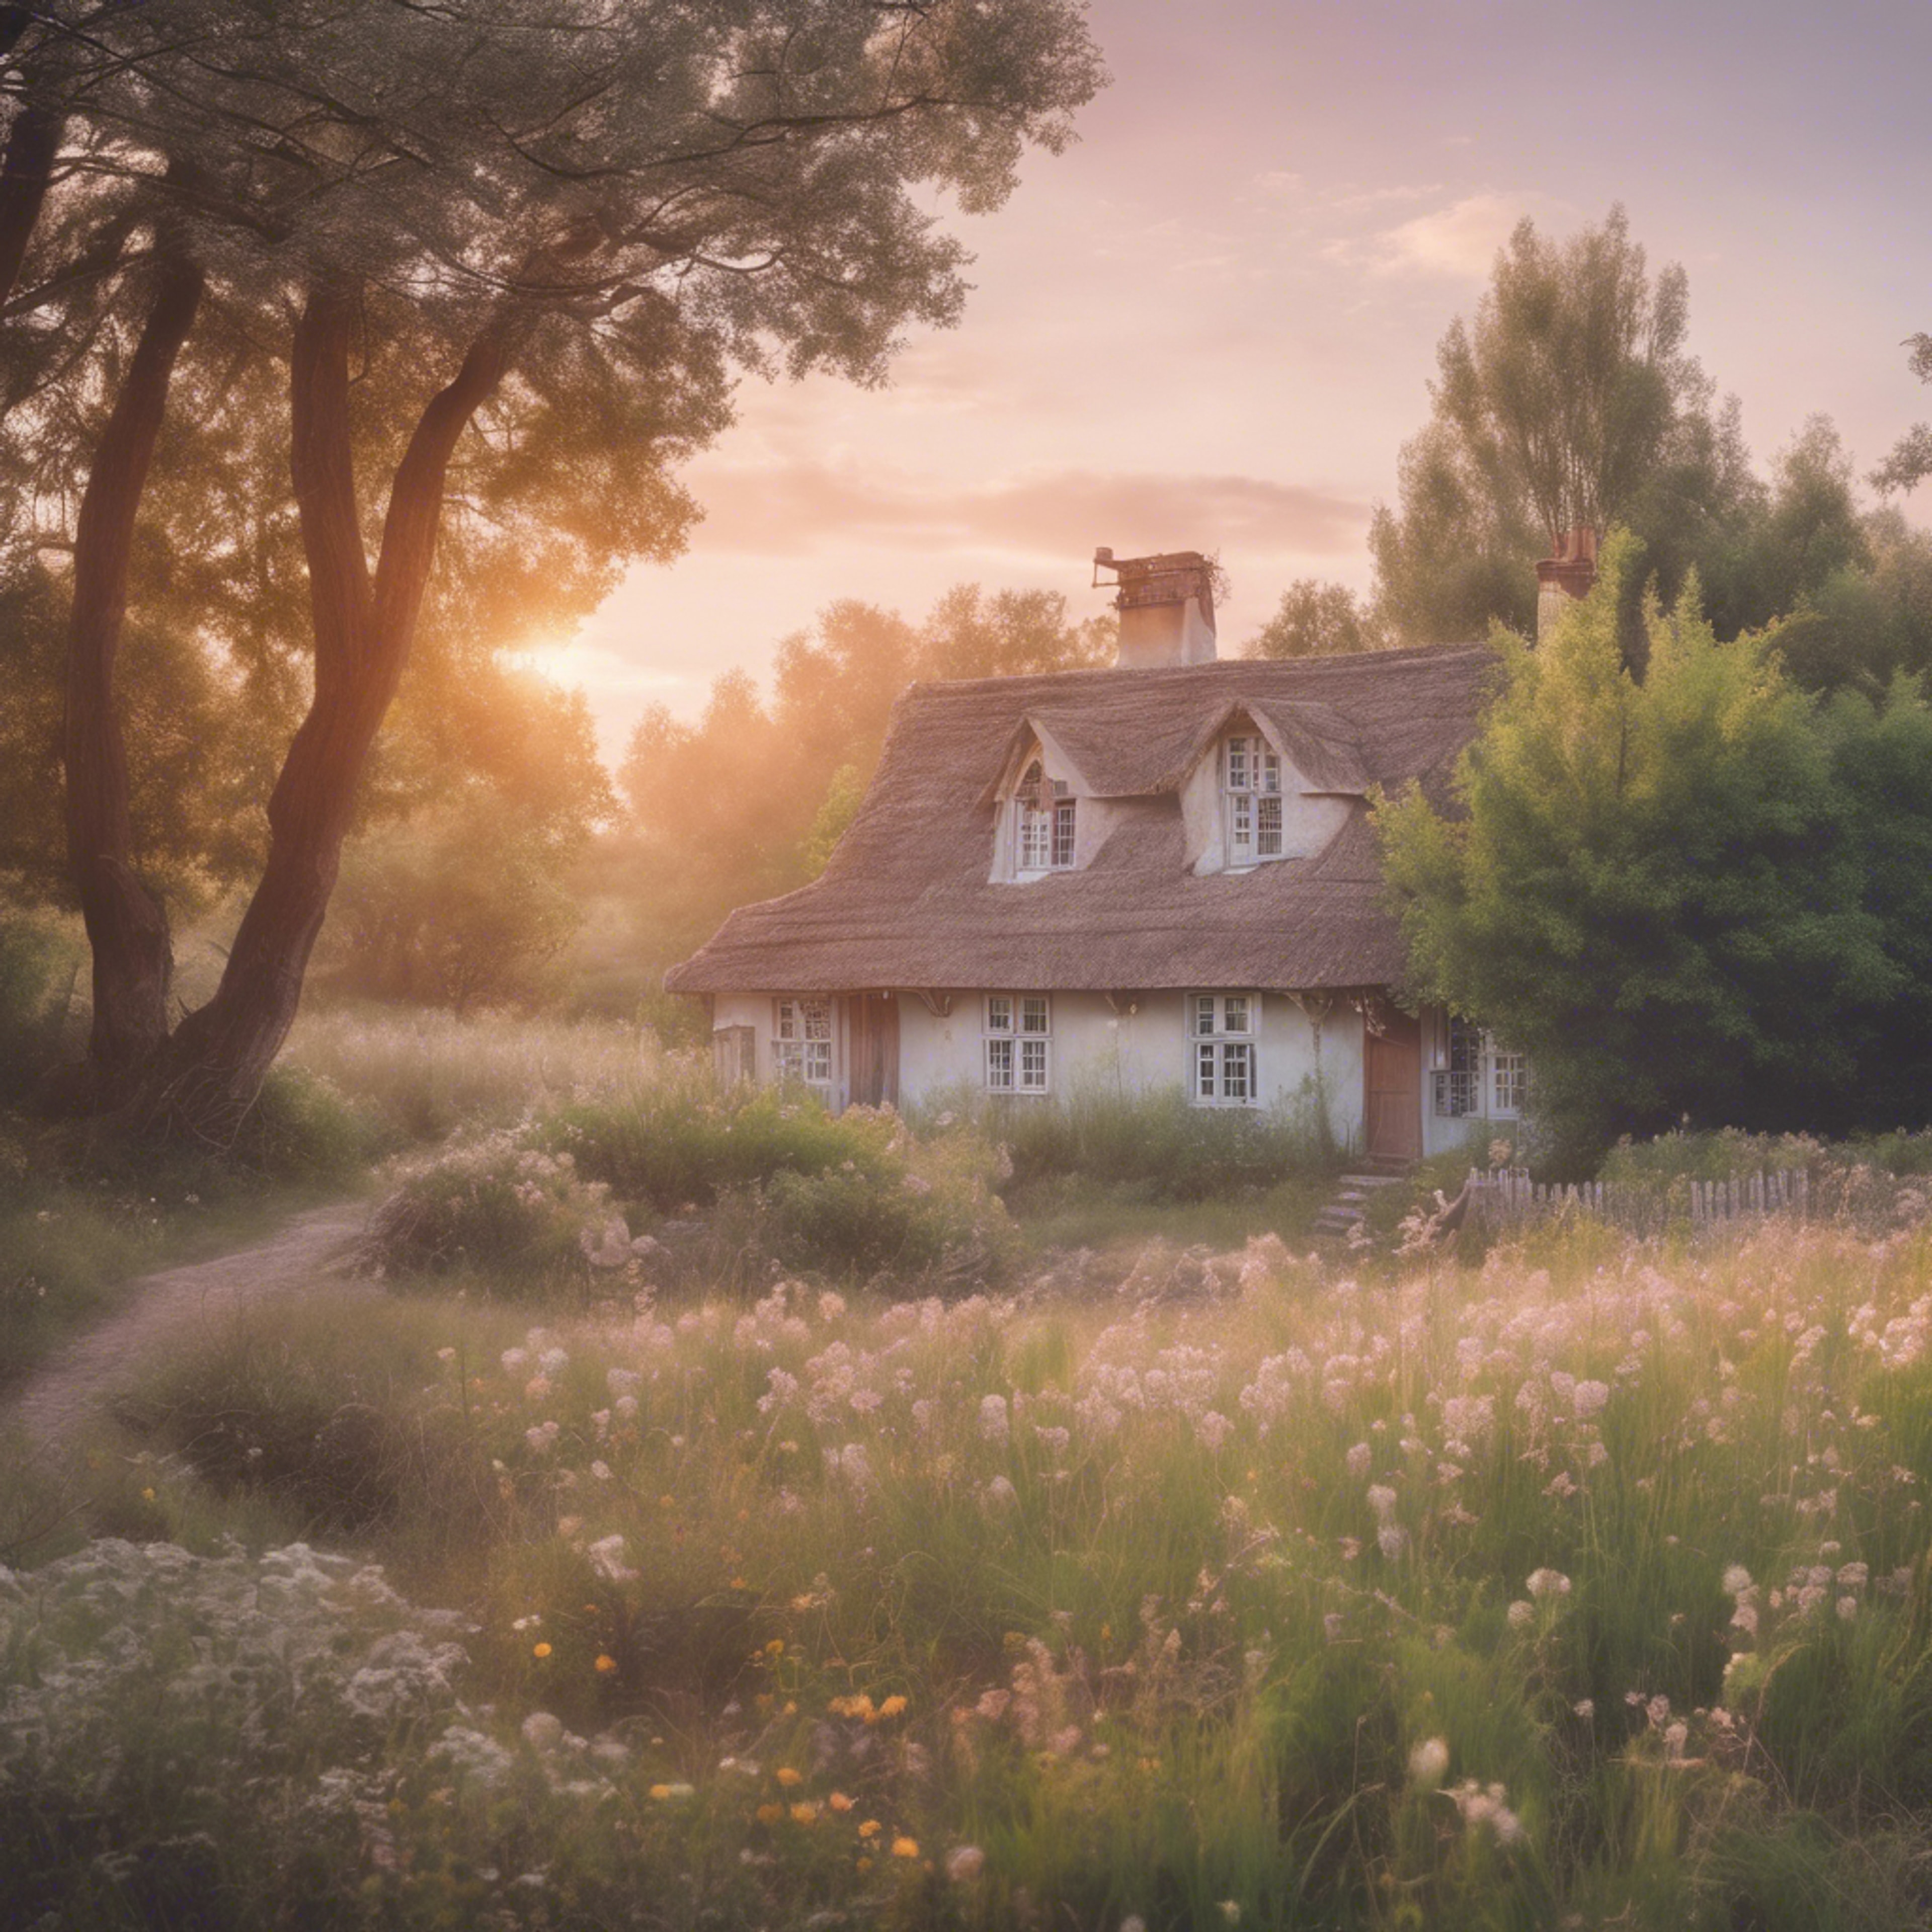 A soft pastel sunrise over rustic cottages, birthing ethereal aesthetic beauty Fond d'écran[daea3b7a39e14a169eb1]